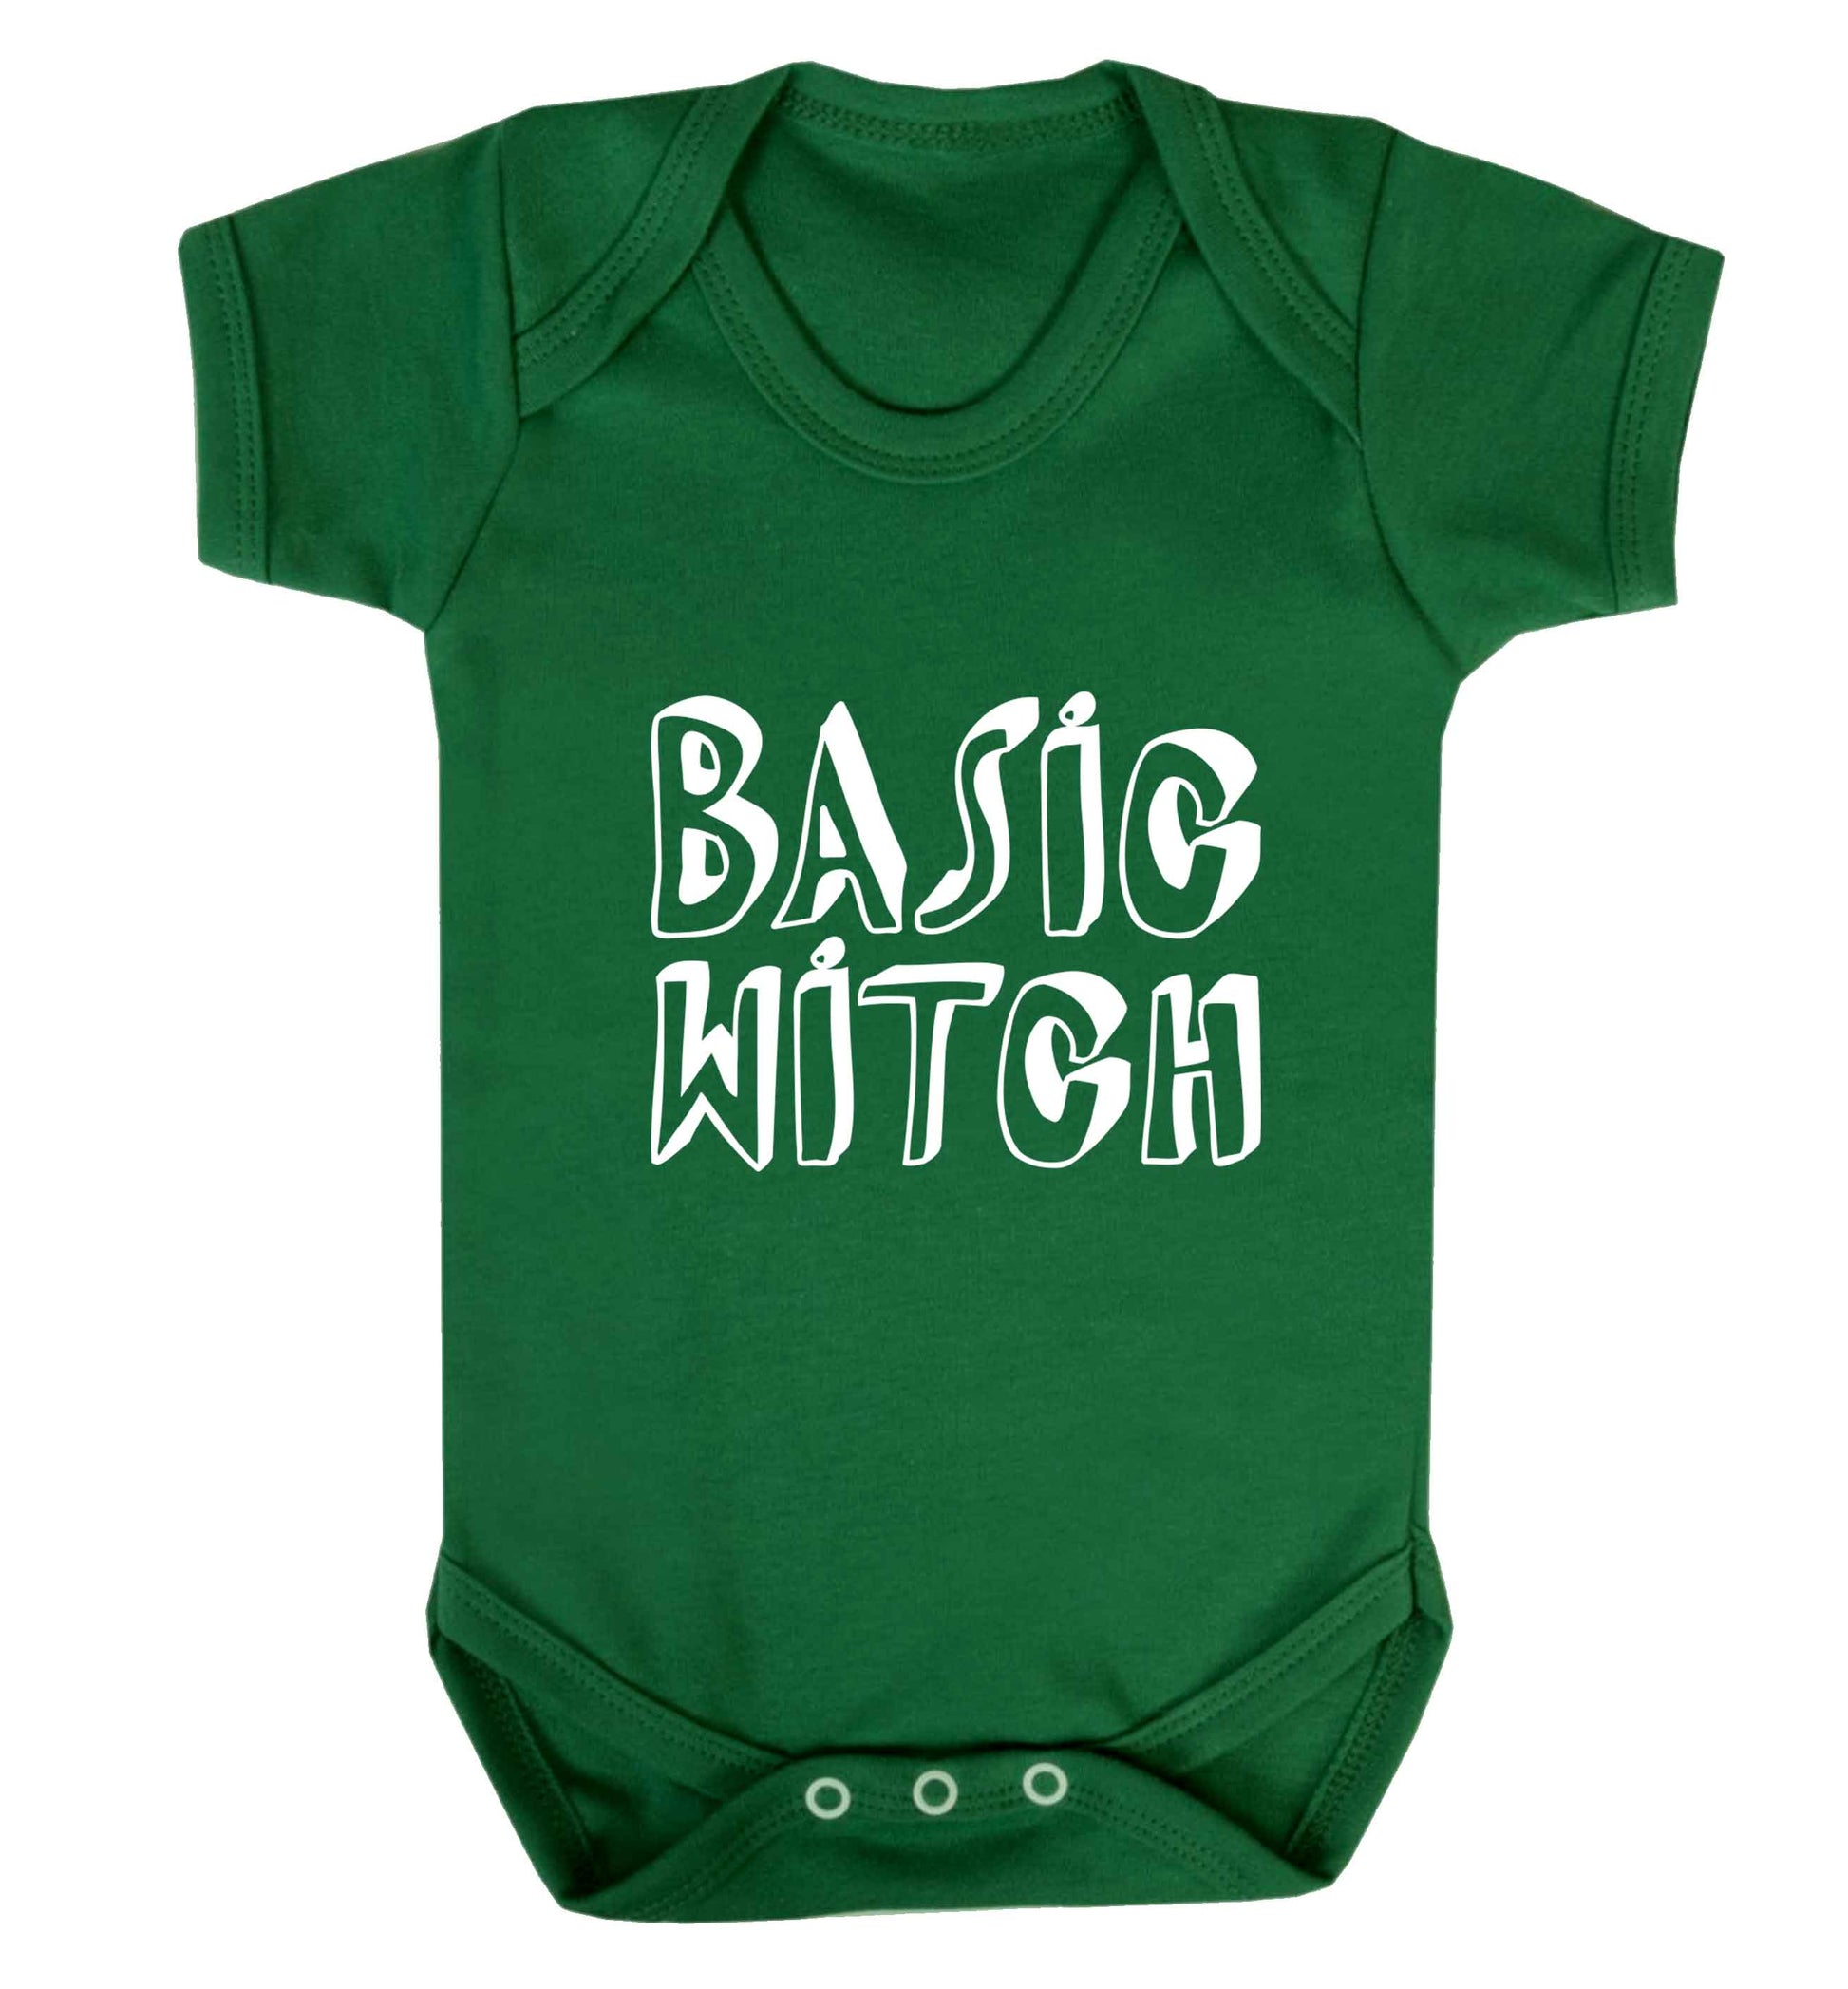 Basic witch baby vest green 18-24 months